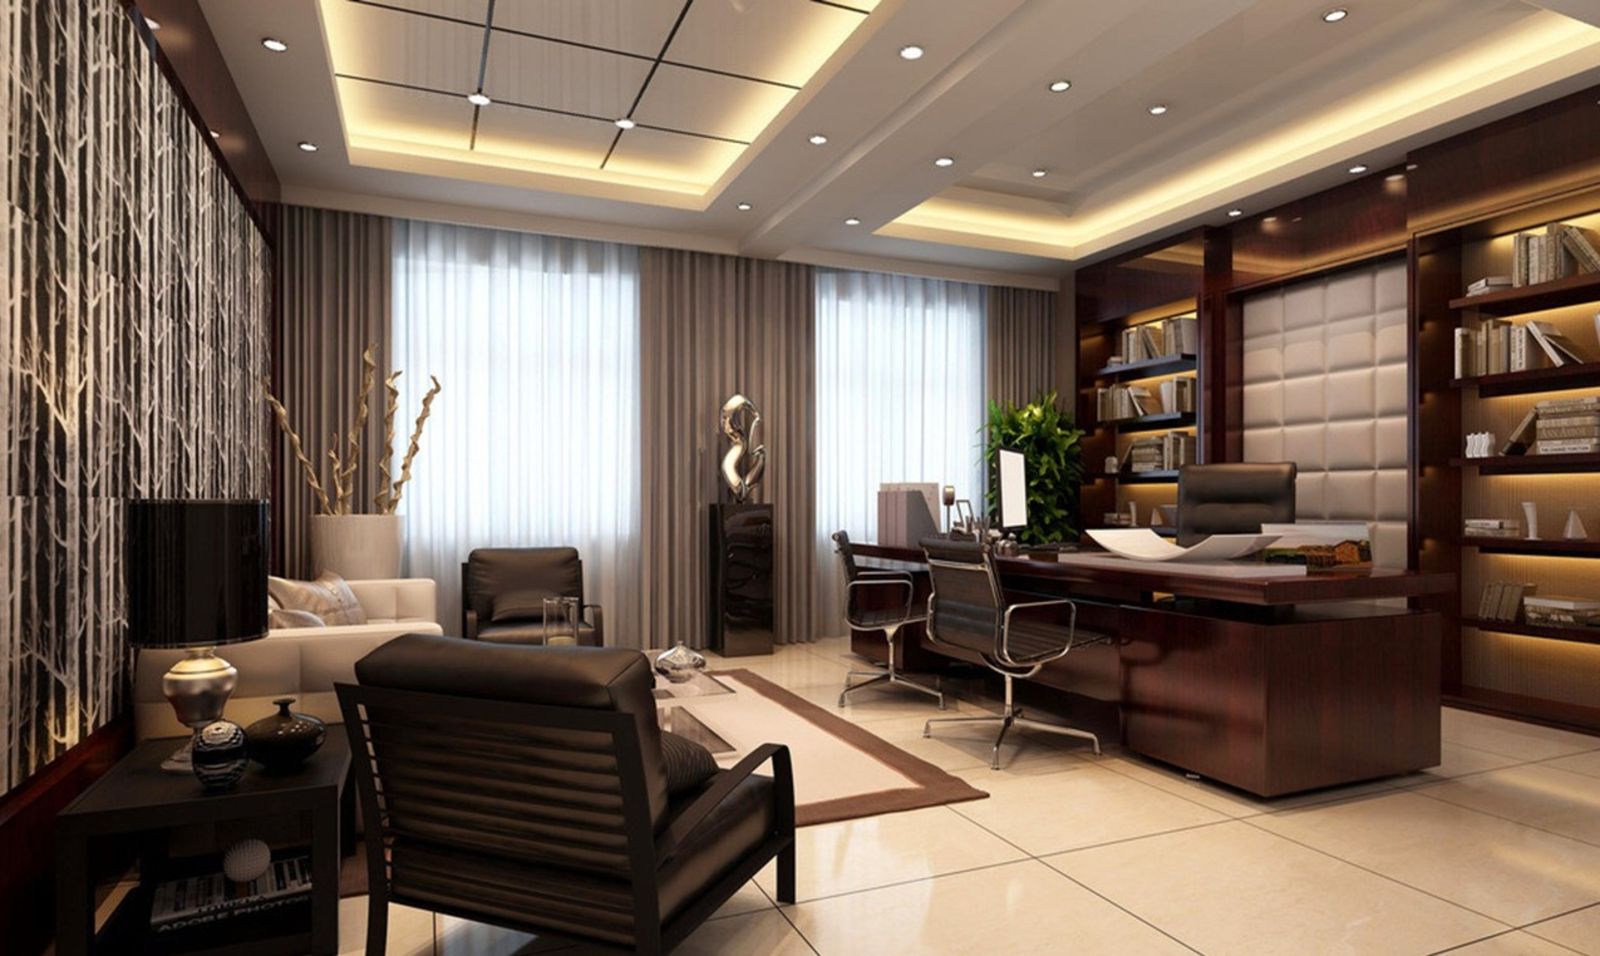 executive office design layout